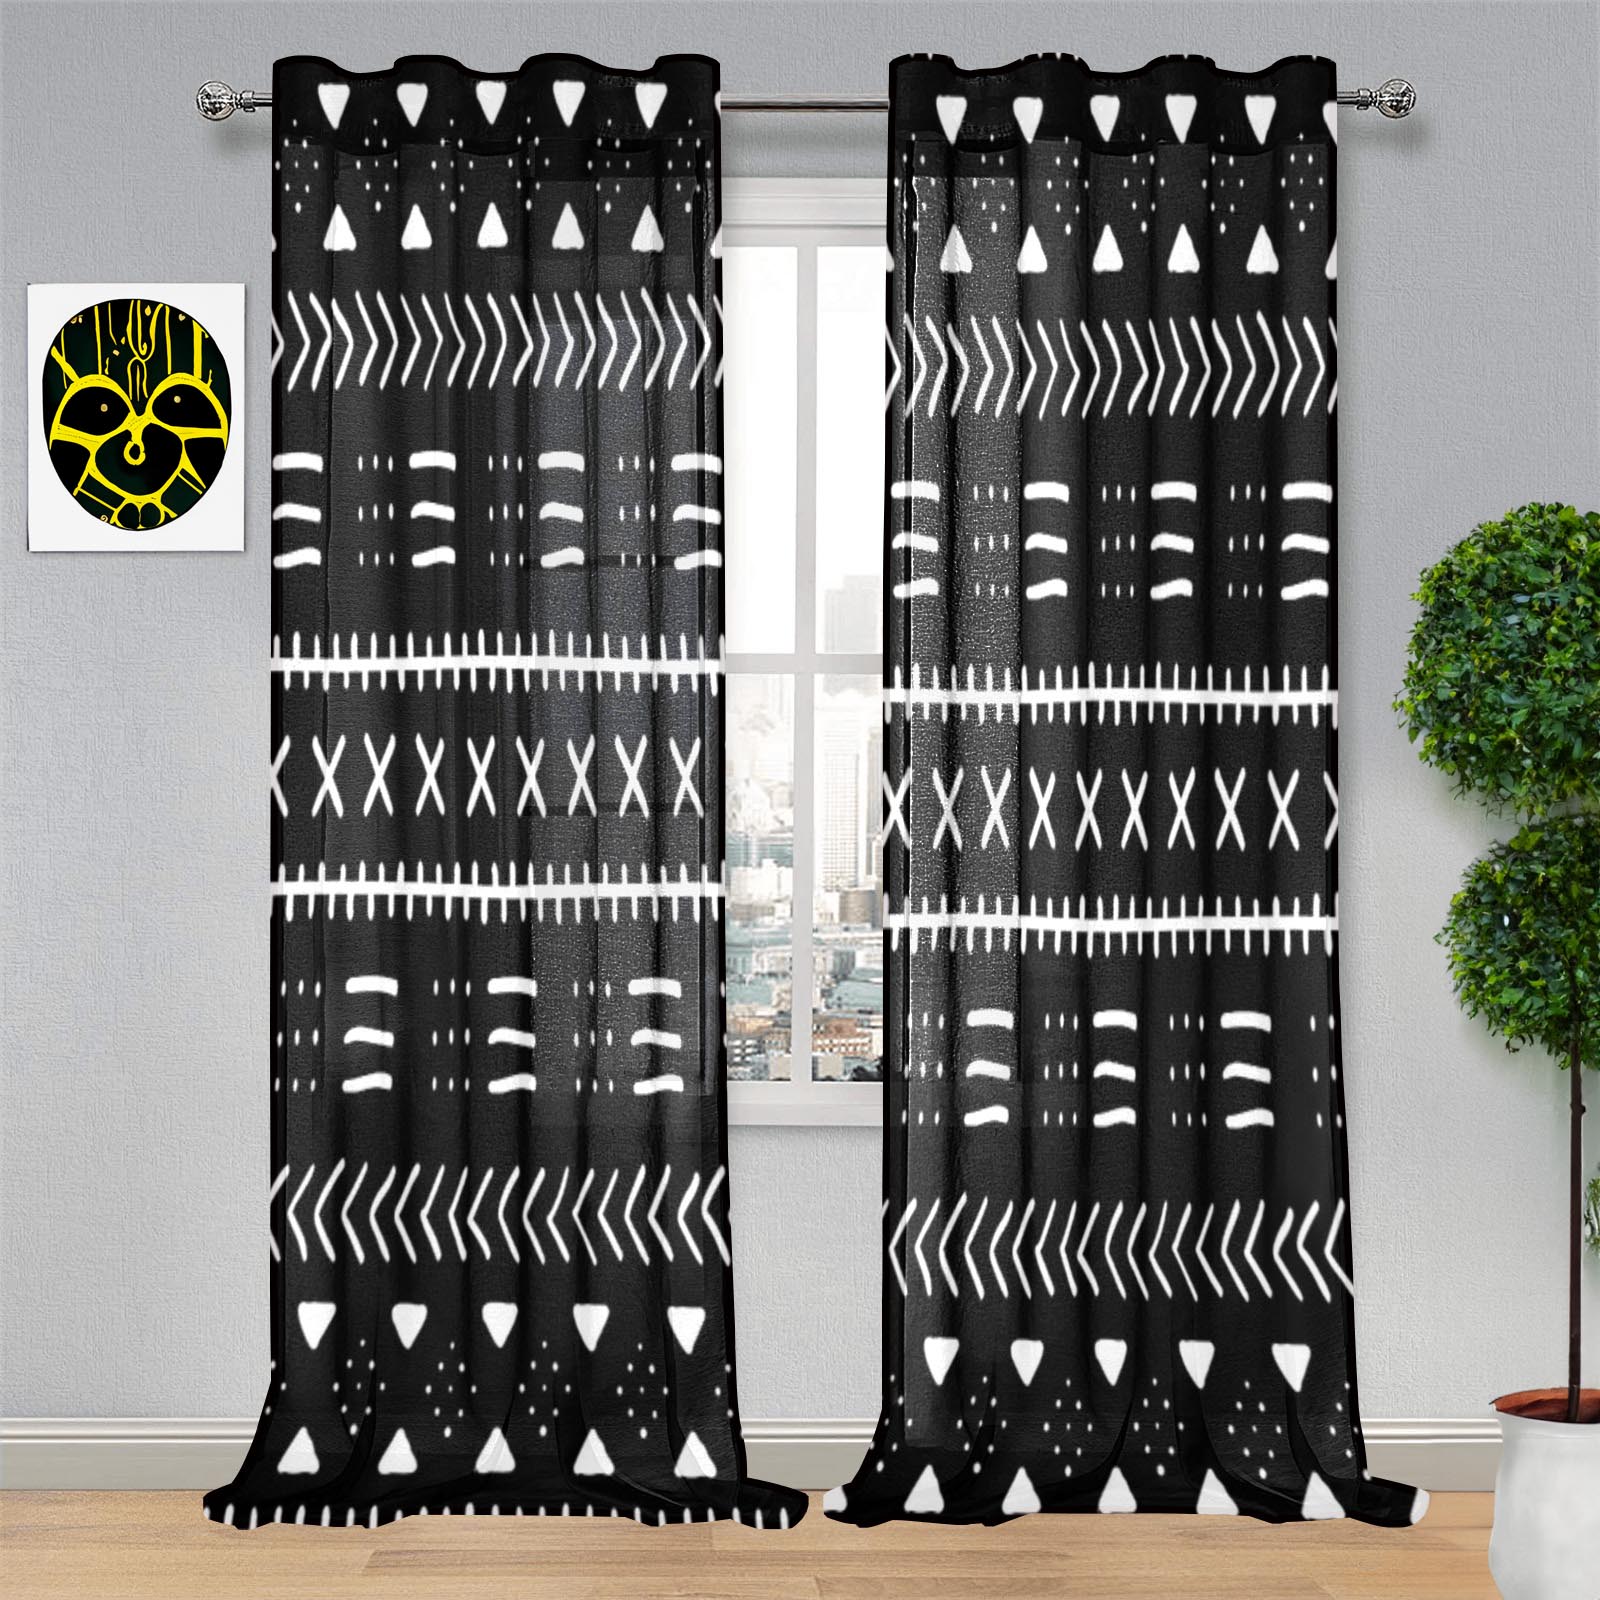 Black and White African Curtain Tribal Print (Two Piece)